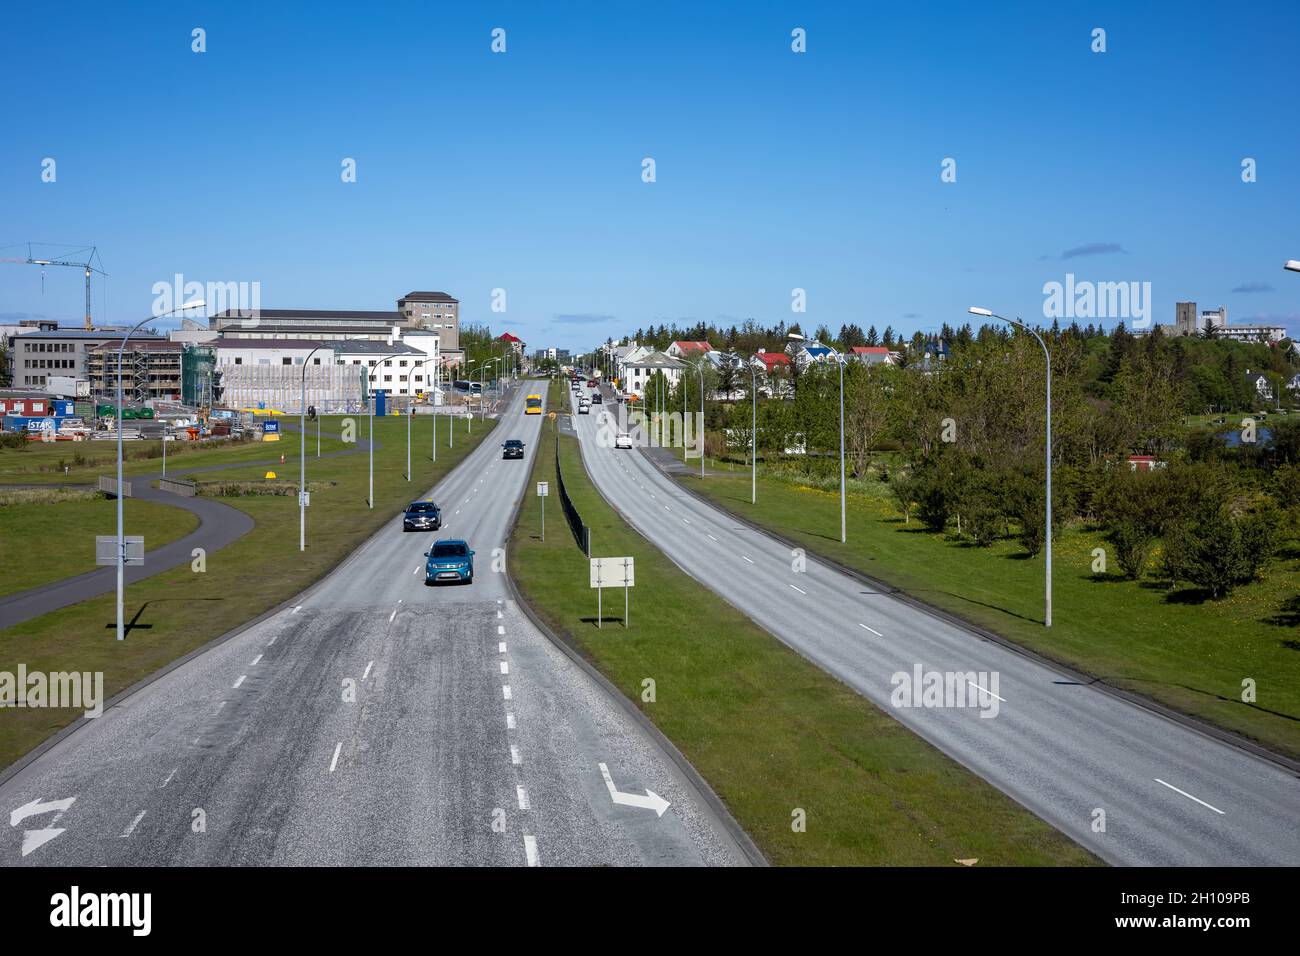 REYKJAVIK, ICELAND - June 12, 2021: A view from a Njardargata overpass to Hringbraut road. Scarce car traffic. Stock Photo